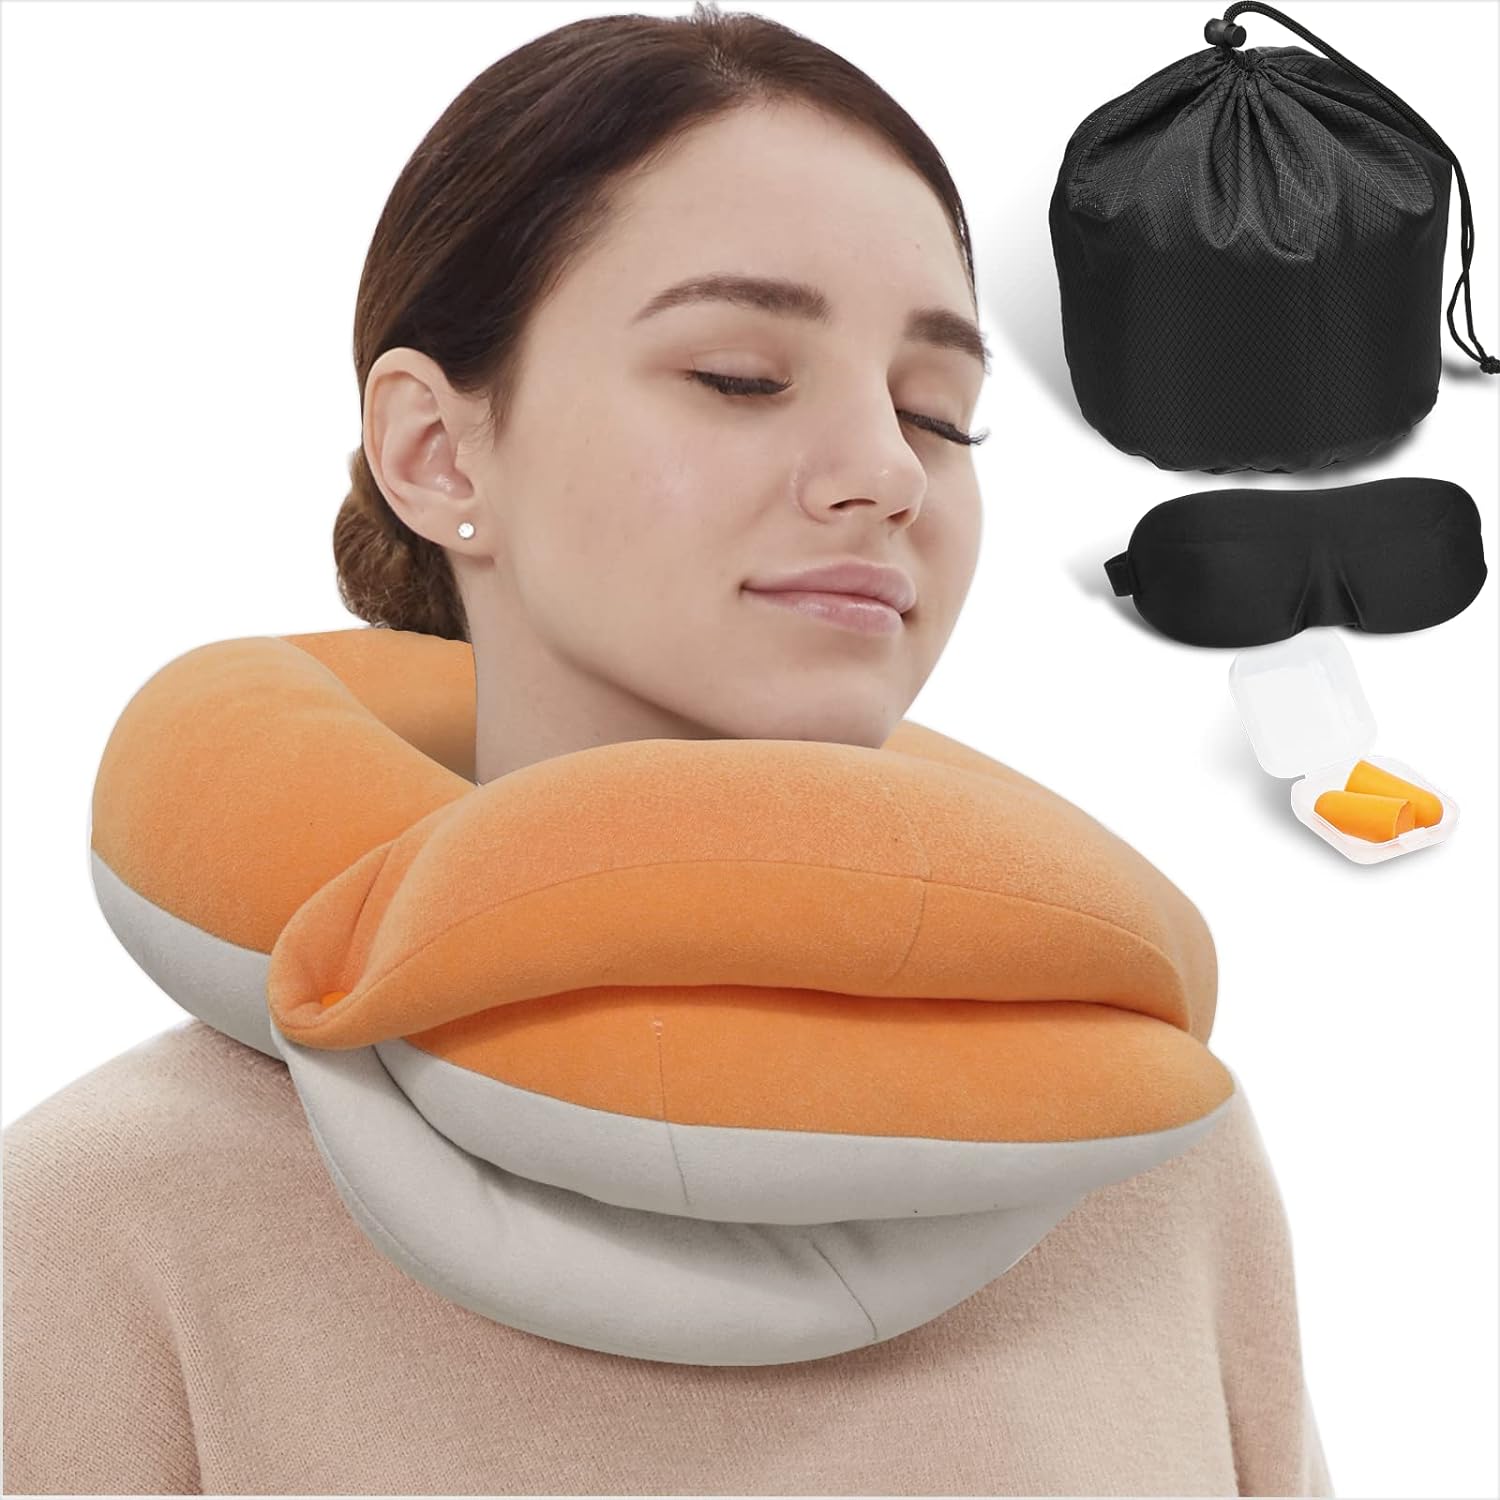 BUYUE Travel Neck Pillows for Airplane, 360° Head Support Sleeping Essentials for Long Flight, Skin-Friendly & Breathable, Kit with 3D Contoured Eye Mask, Earplugs and Storage Bag (Adult, Orange)